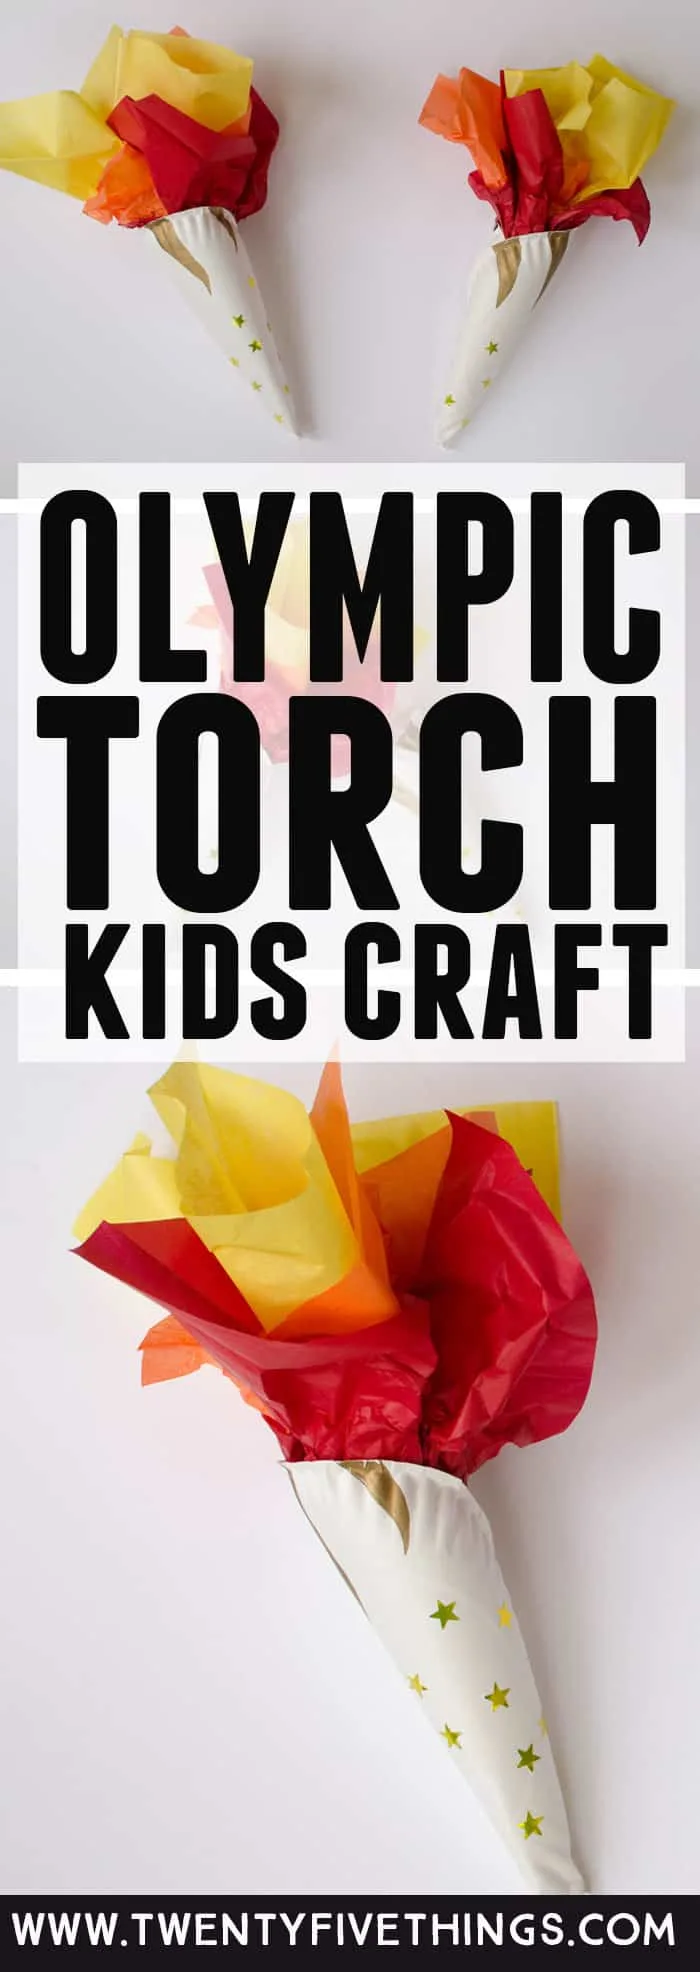 This Olympic torch craft is a fun way to celebrate the Olympics with kids. Slide a battery-powered tea light inside to make the torch glow.